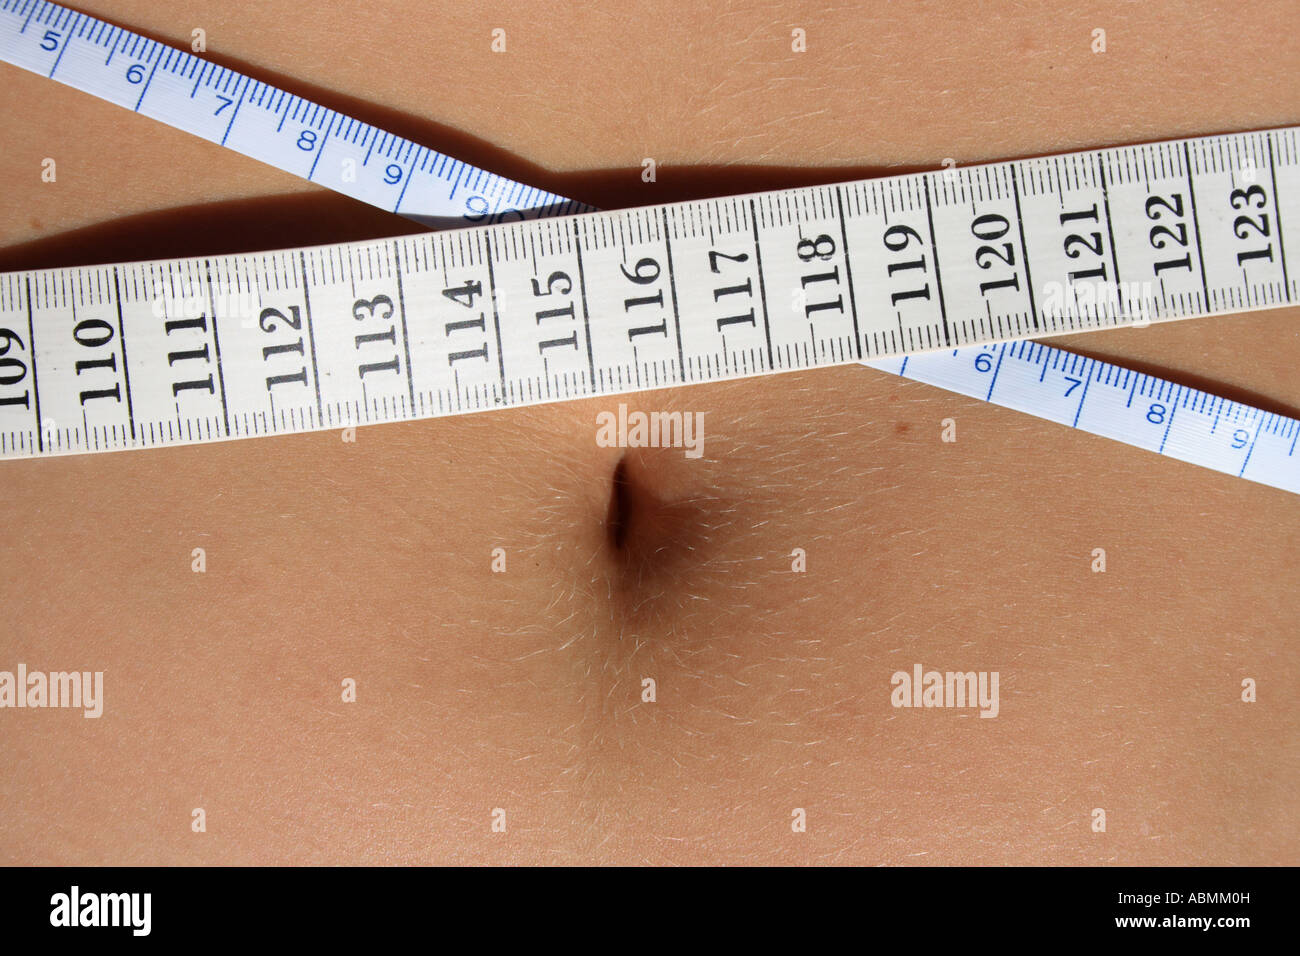 belly of a young woman measuring waist. Measuring tape INCH and CM